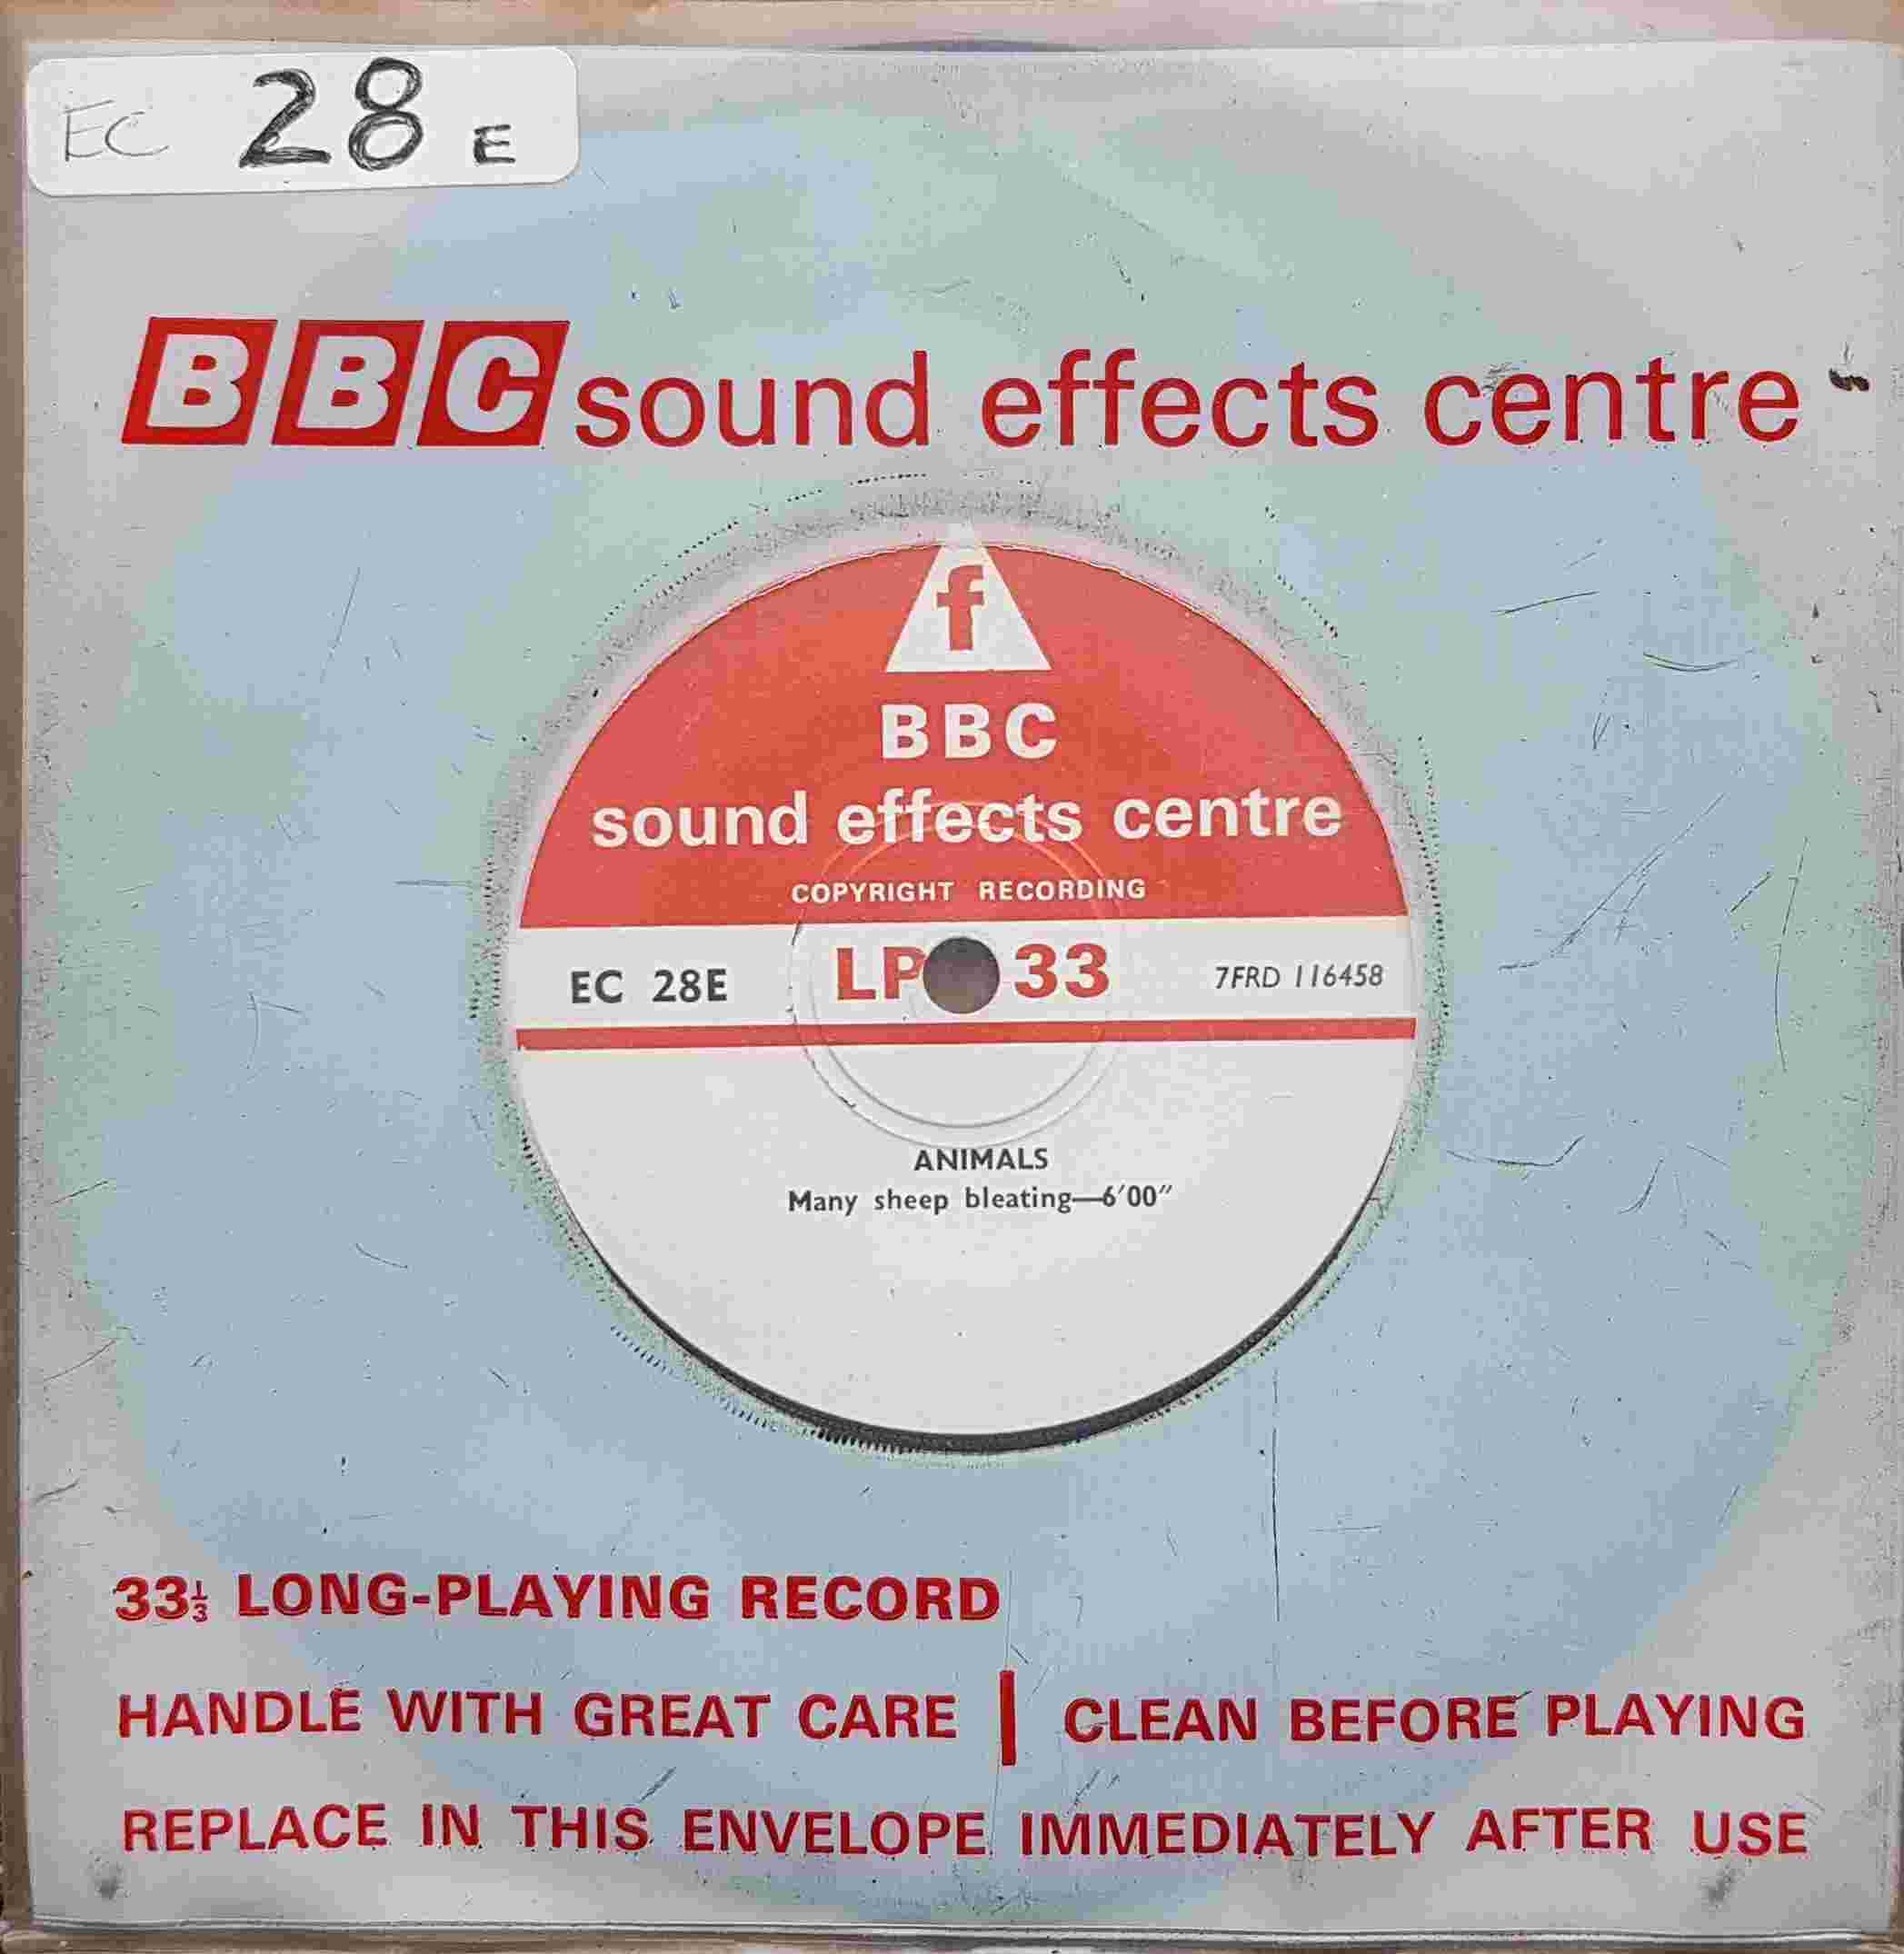 Picture of EC 28E Animals by artist Not registered from the BBC records and Tapes library